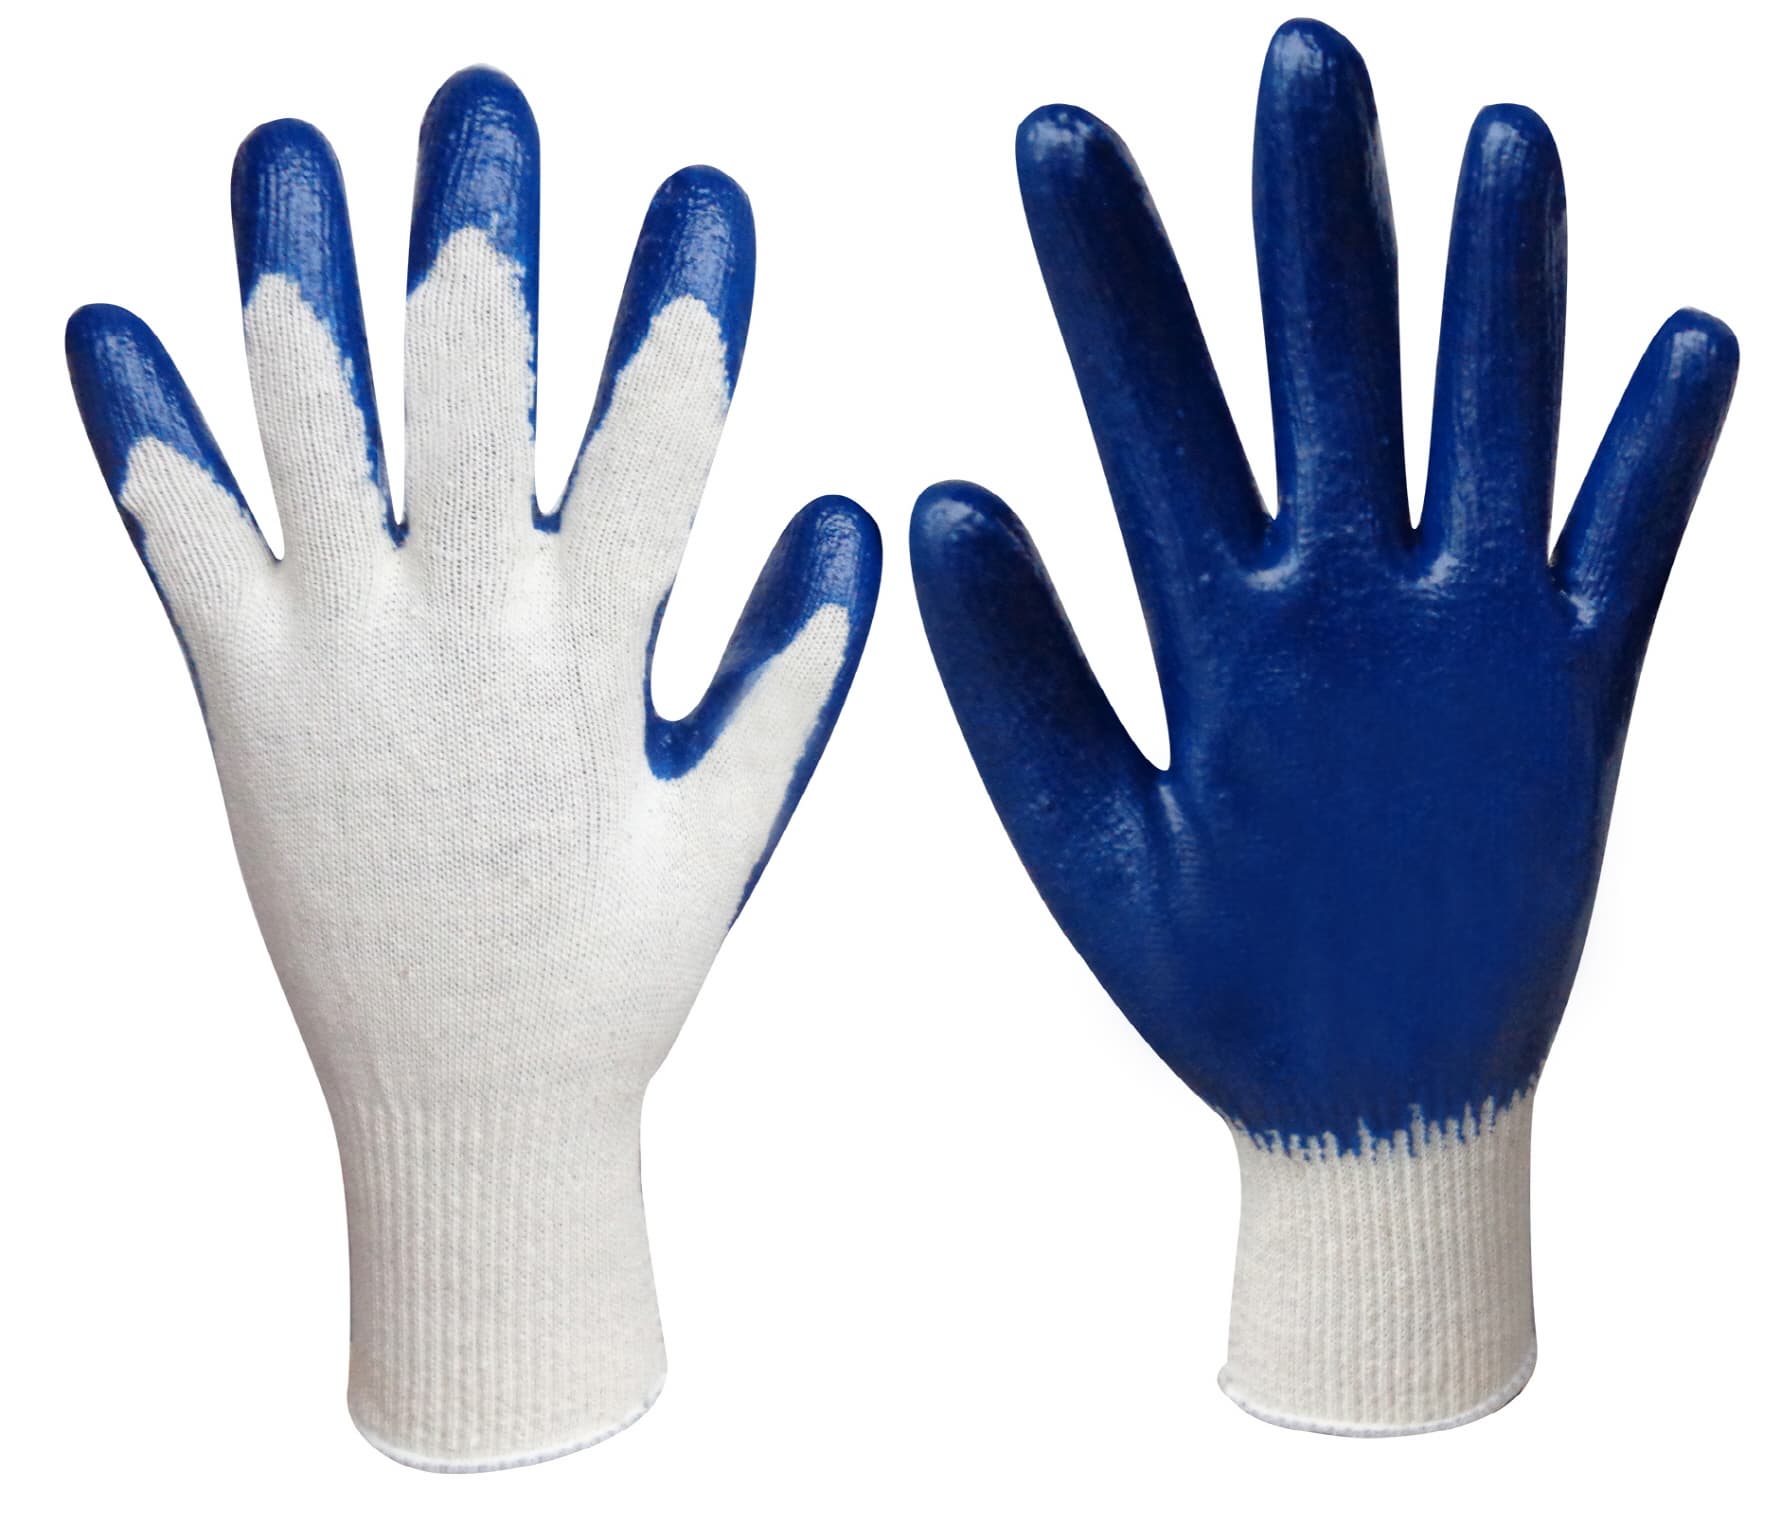 HLCG13_13G T_C_70_30_ with natural Latex coating gloves